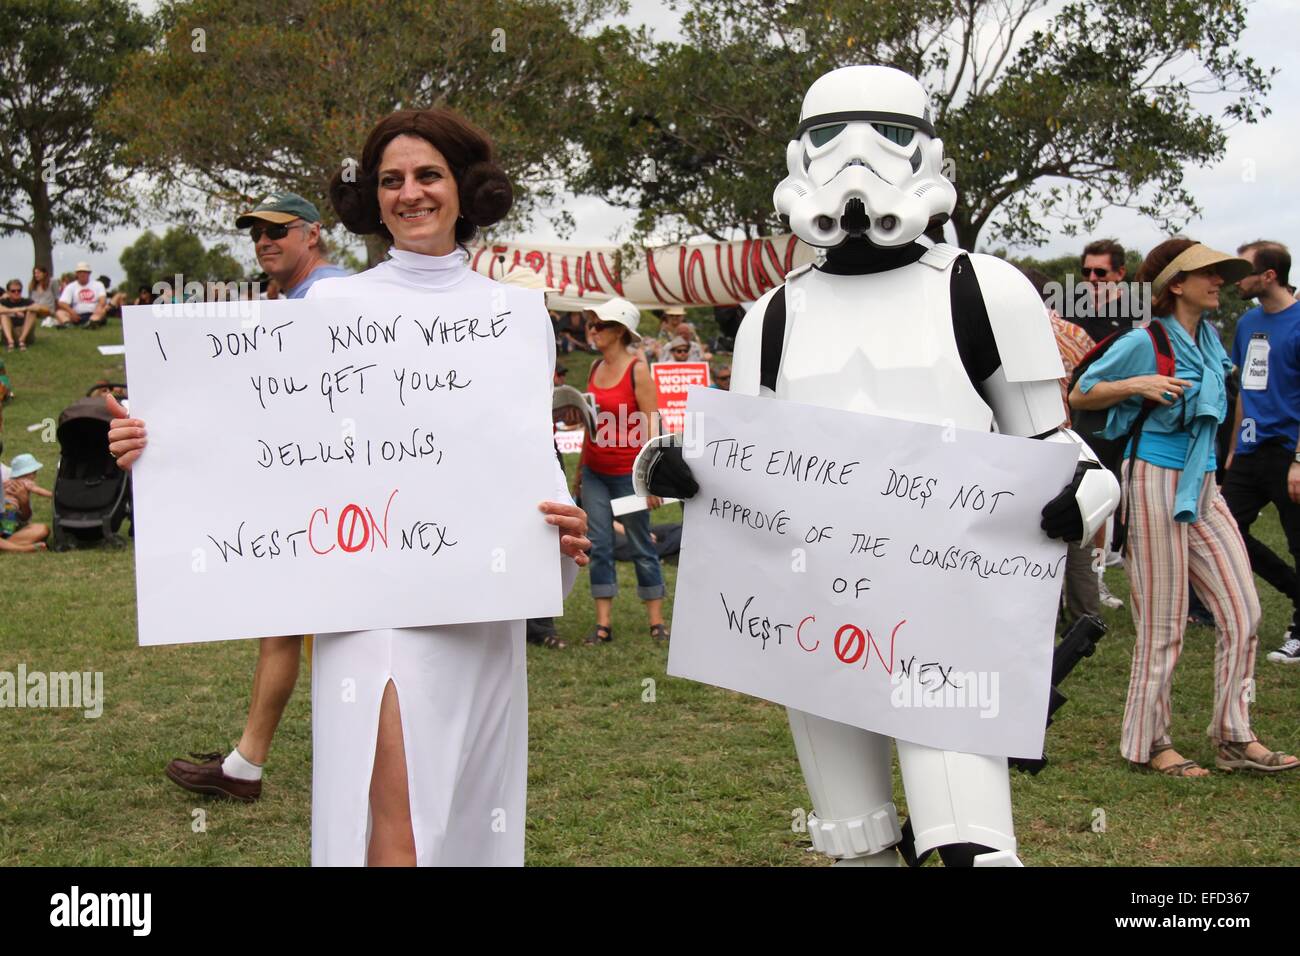 Sydney, Australia. 1 February 2015. Protesters against the WestConnex toll-road project and in favour of public transport marched from King Street, Newtown to Sydney Park, St Peters where speeches were made. There was a happy atmosphere with music and dancing. Pictured are protesters dressed as Princess Leia and a Stormtrooper from Star Wars. Credit: Copyright Credit:  2015. Richard Milnes / Alamy Live News Stock Photo